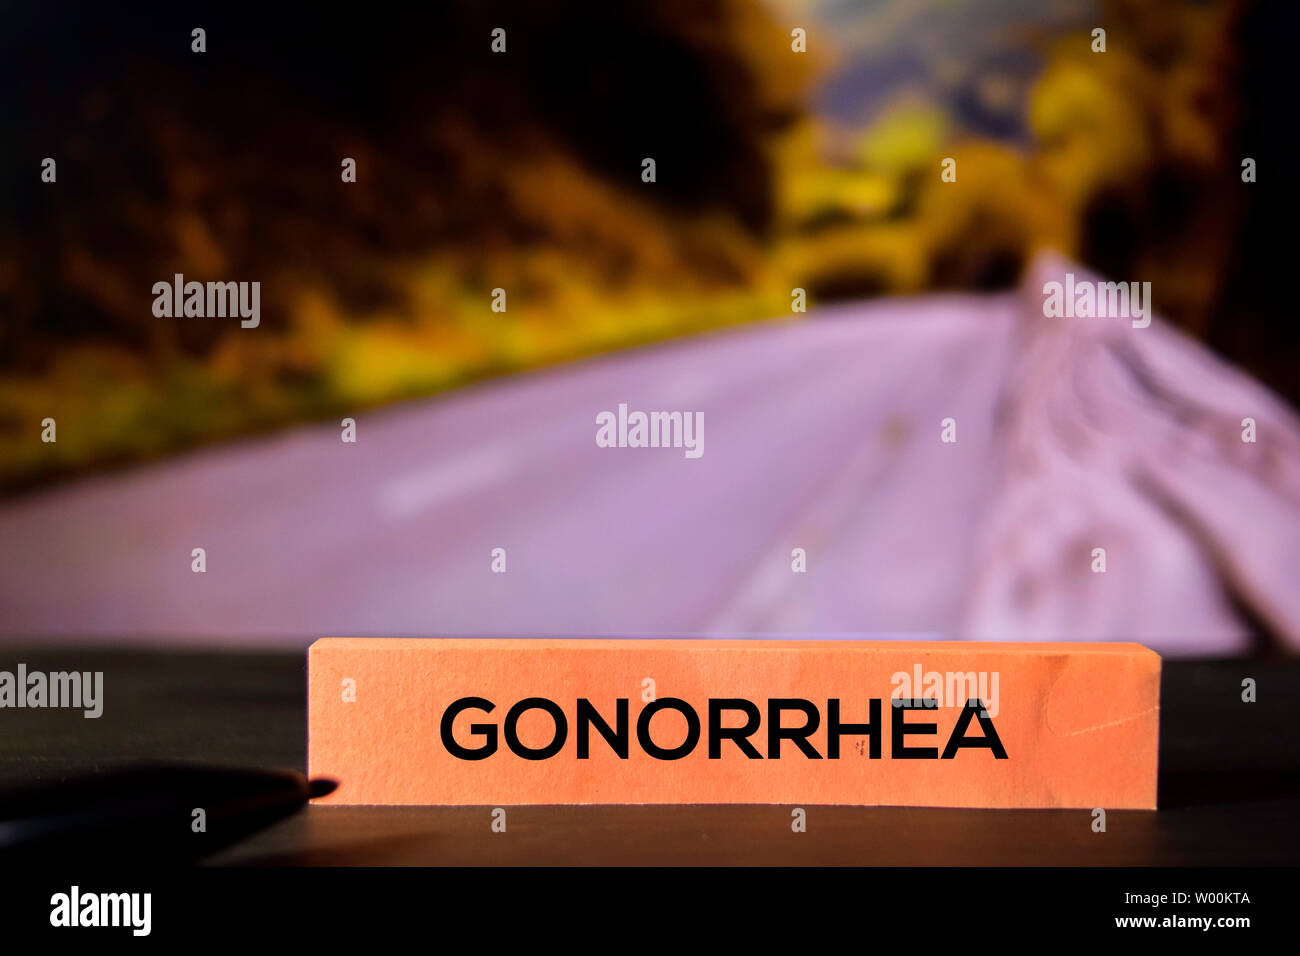 Gonorrhea on the sticky notes with bokeh background Stock Photo